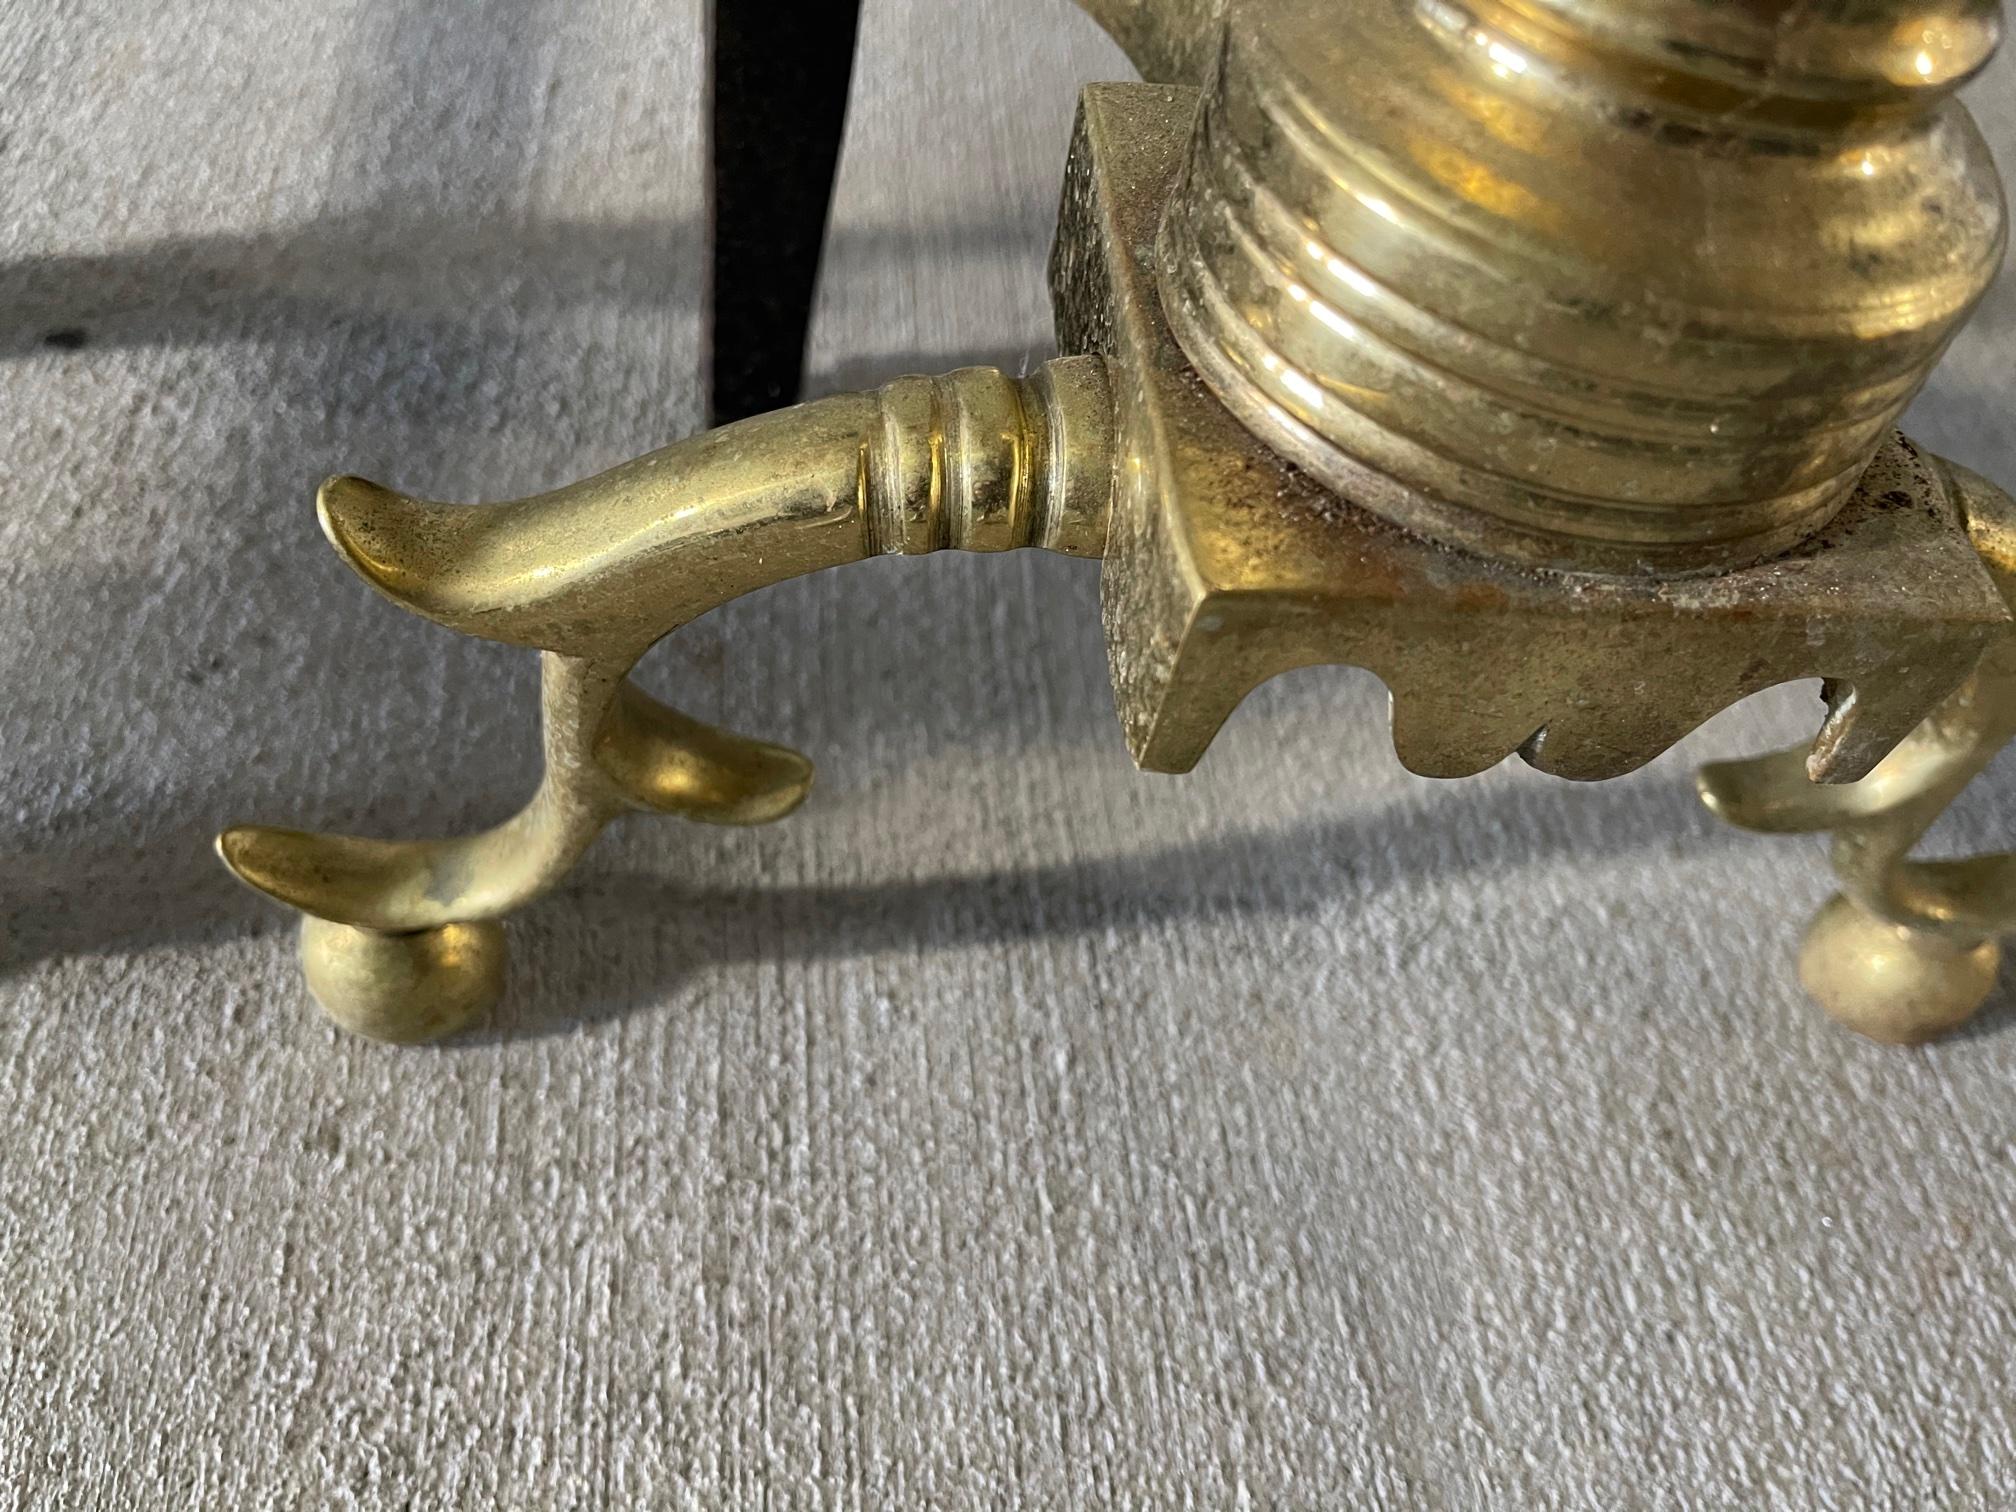 Pair of Brass Andirons with a Decorative Ball at Top and Feet, 19th Century 4